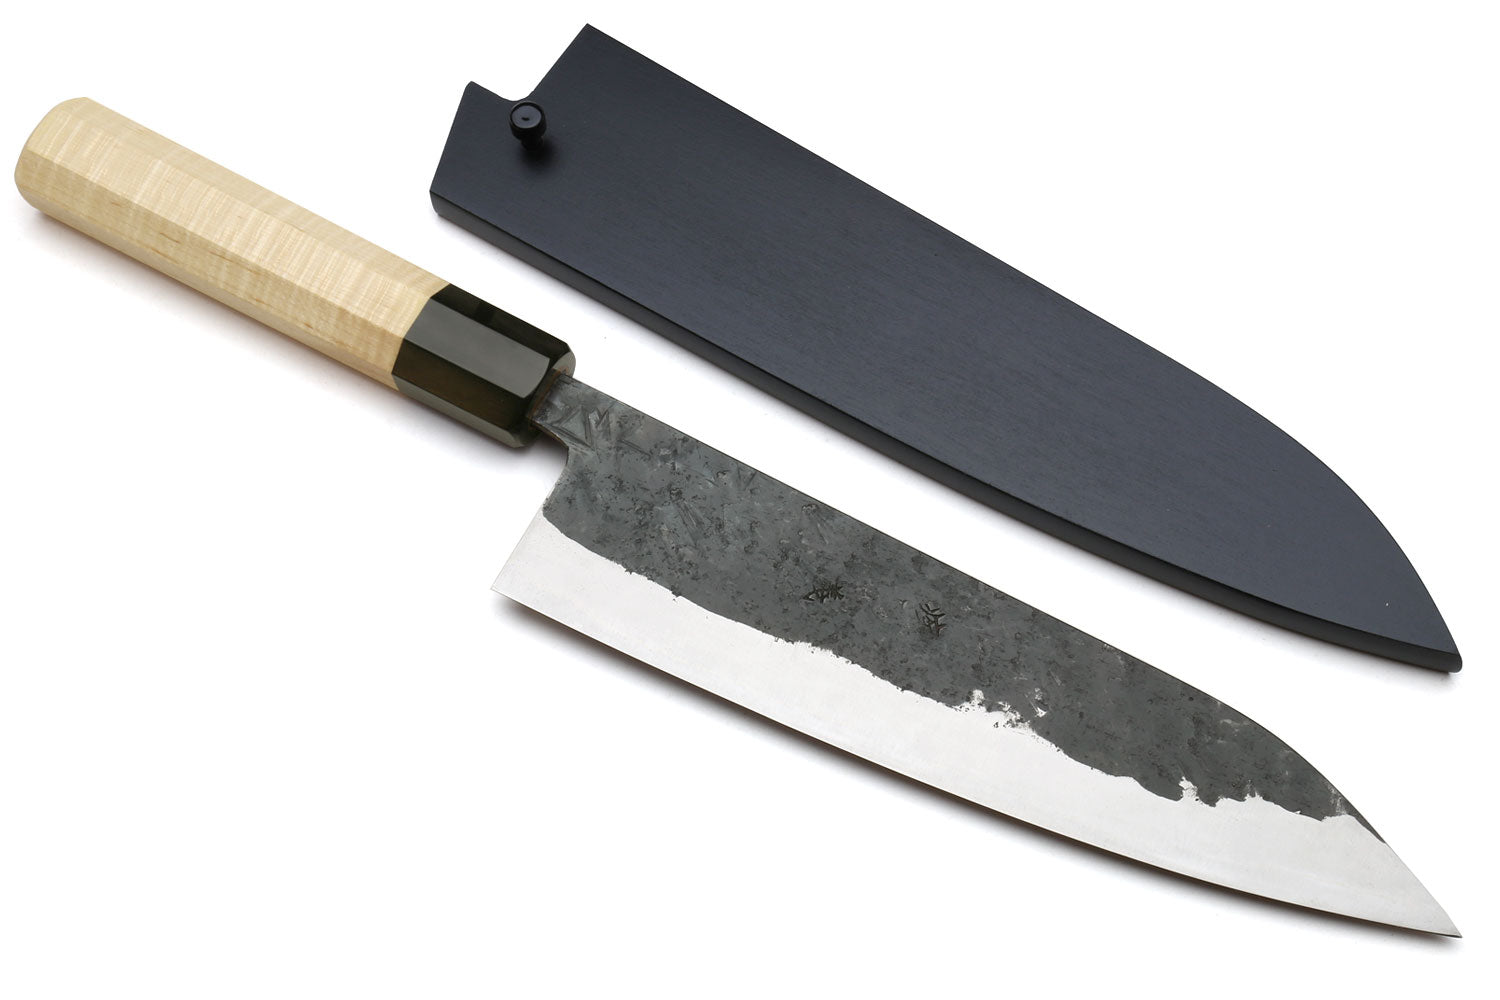 Why are Japanese Knife Handles Made Out of Wood?